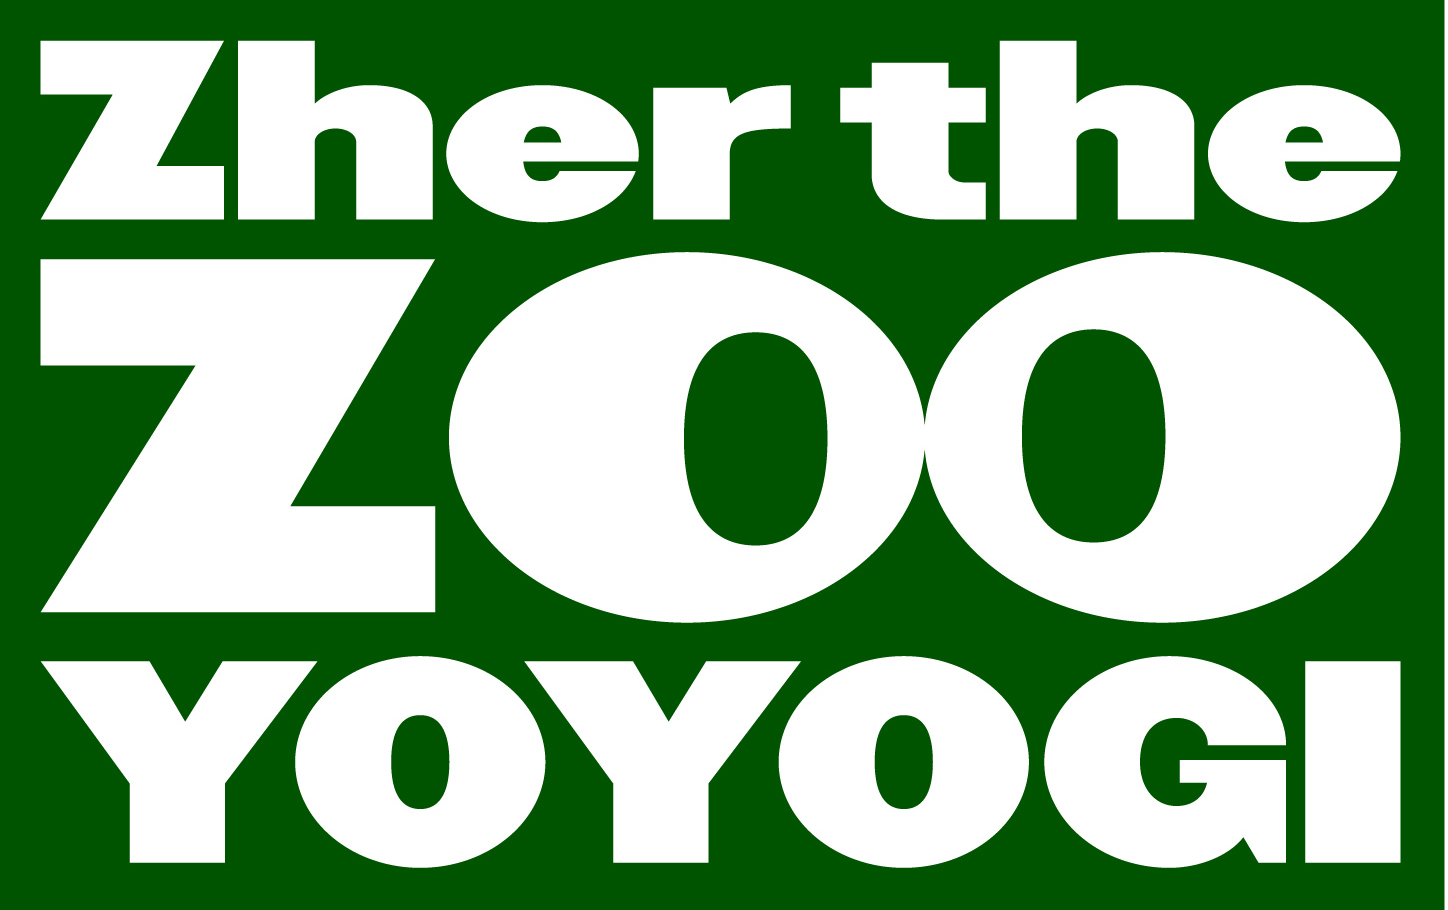 "Zher the Zoo count down 2017-2018"